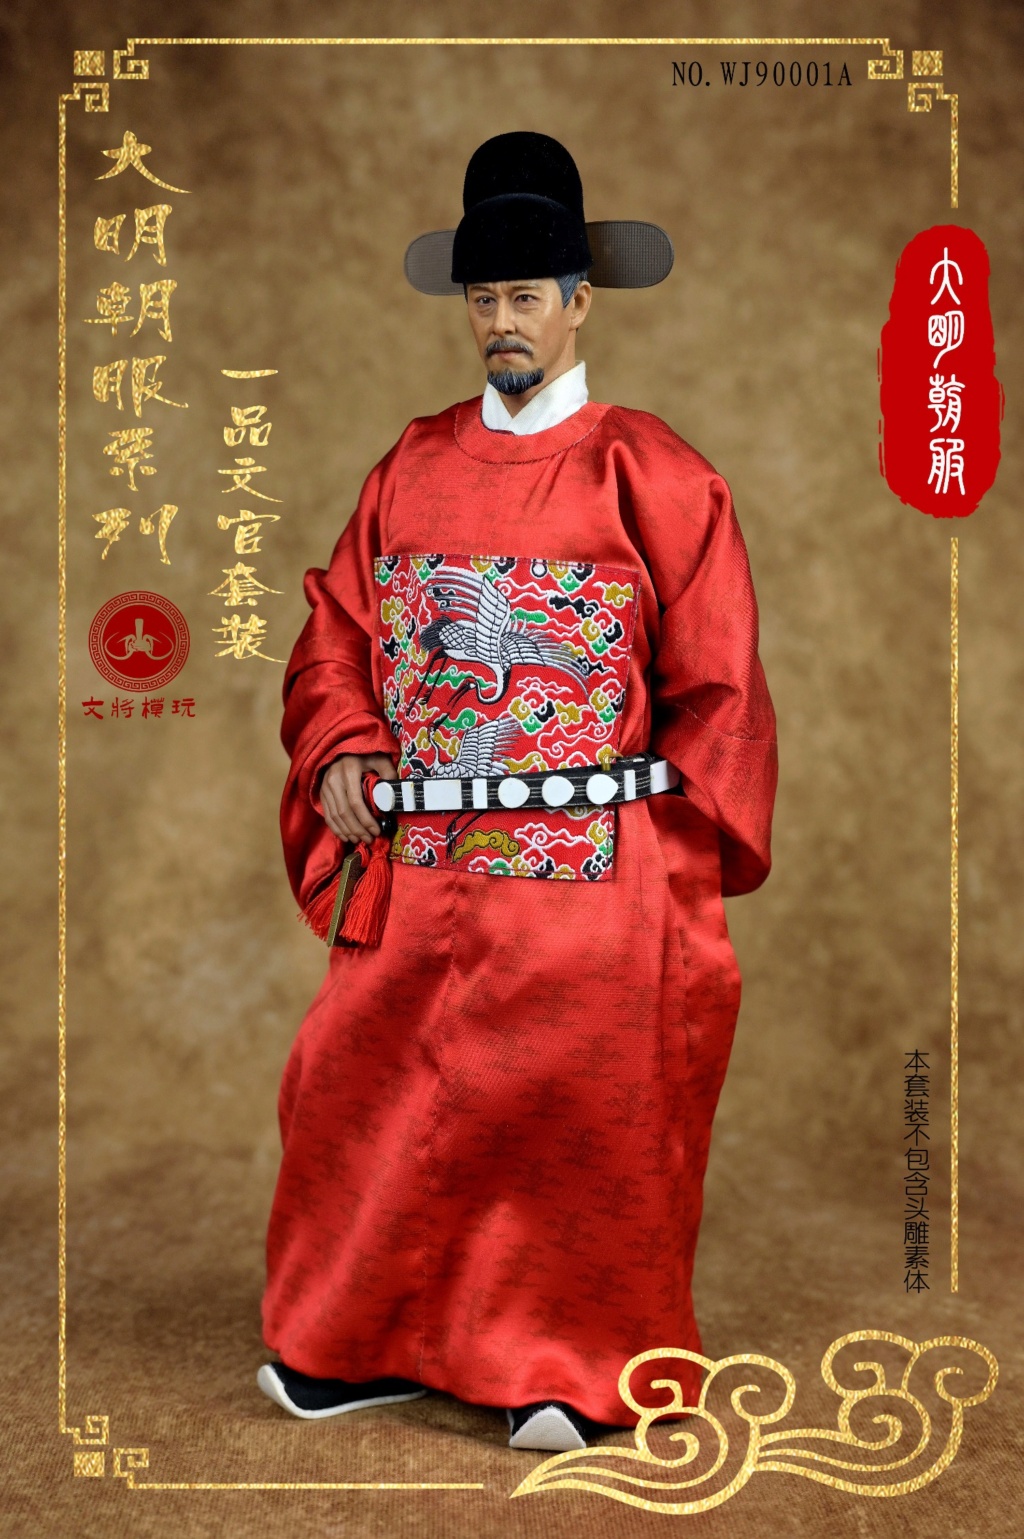 NEW PRODUCT: Wenjiang Model Play: 1/6 Ming Dynasty Clothes Series - Yipin Civilian/Military Officer Set WJ90001A/B 16473810